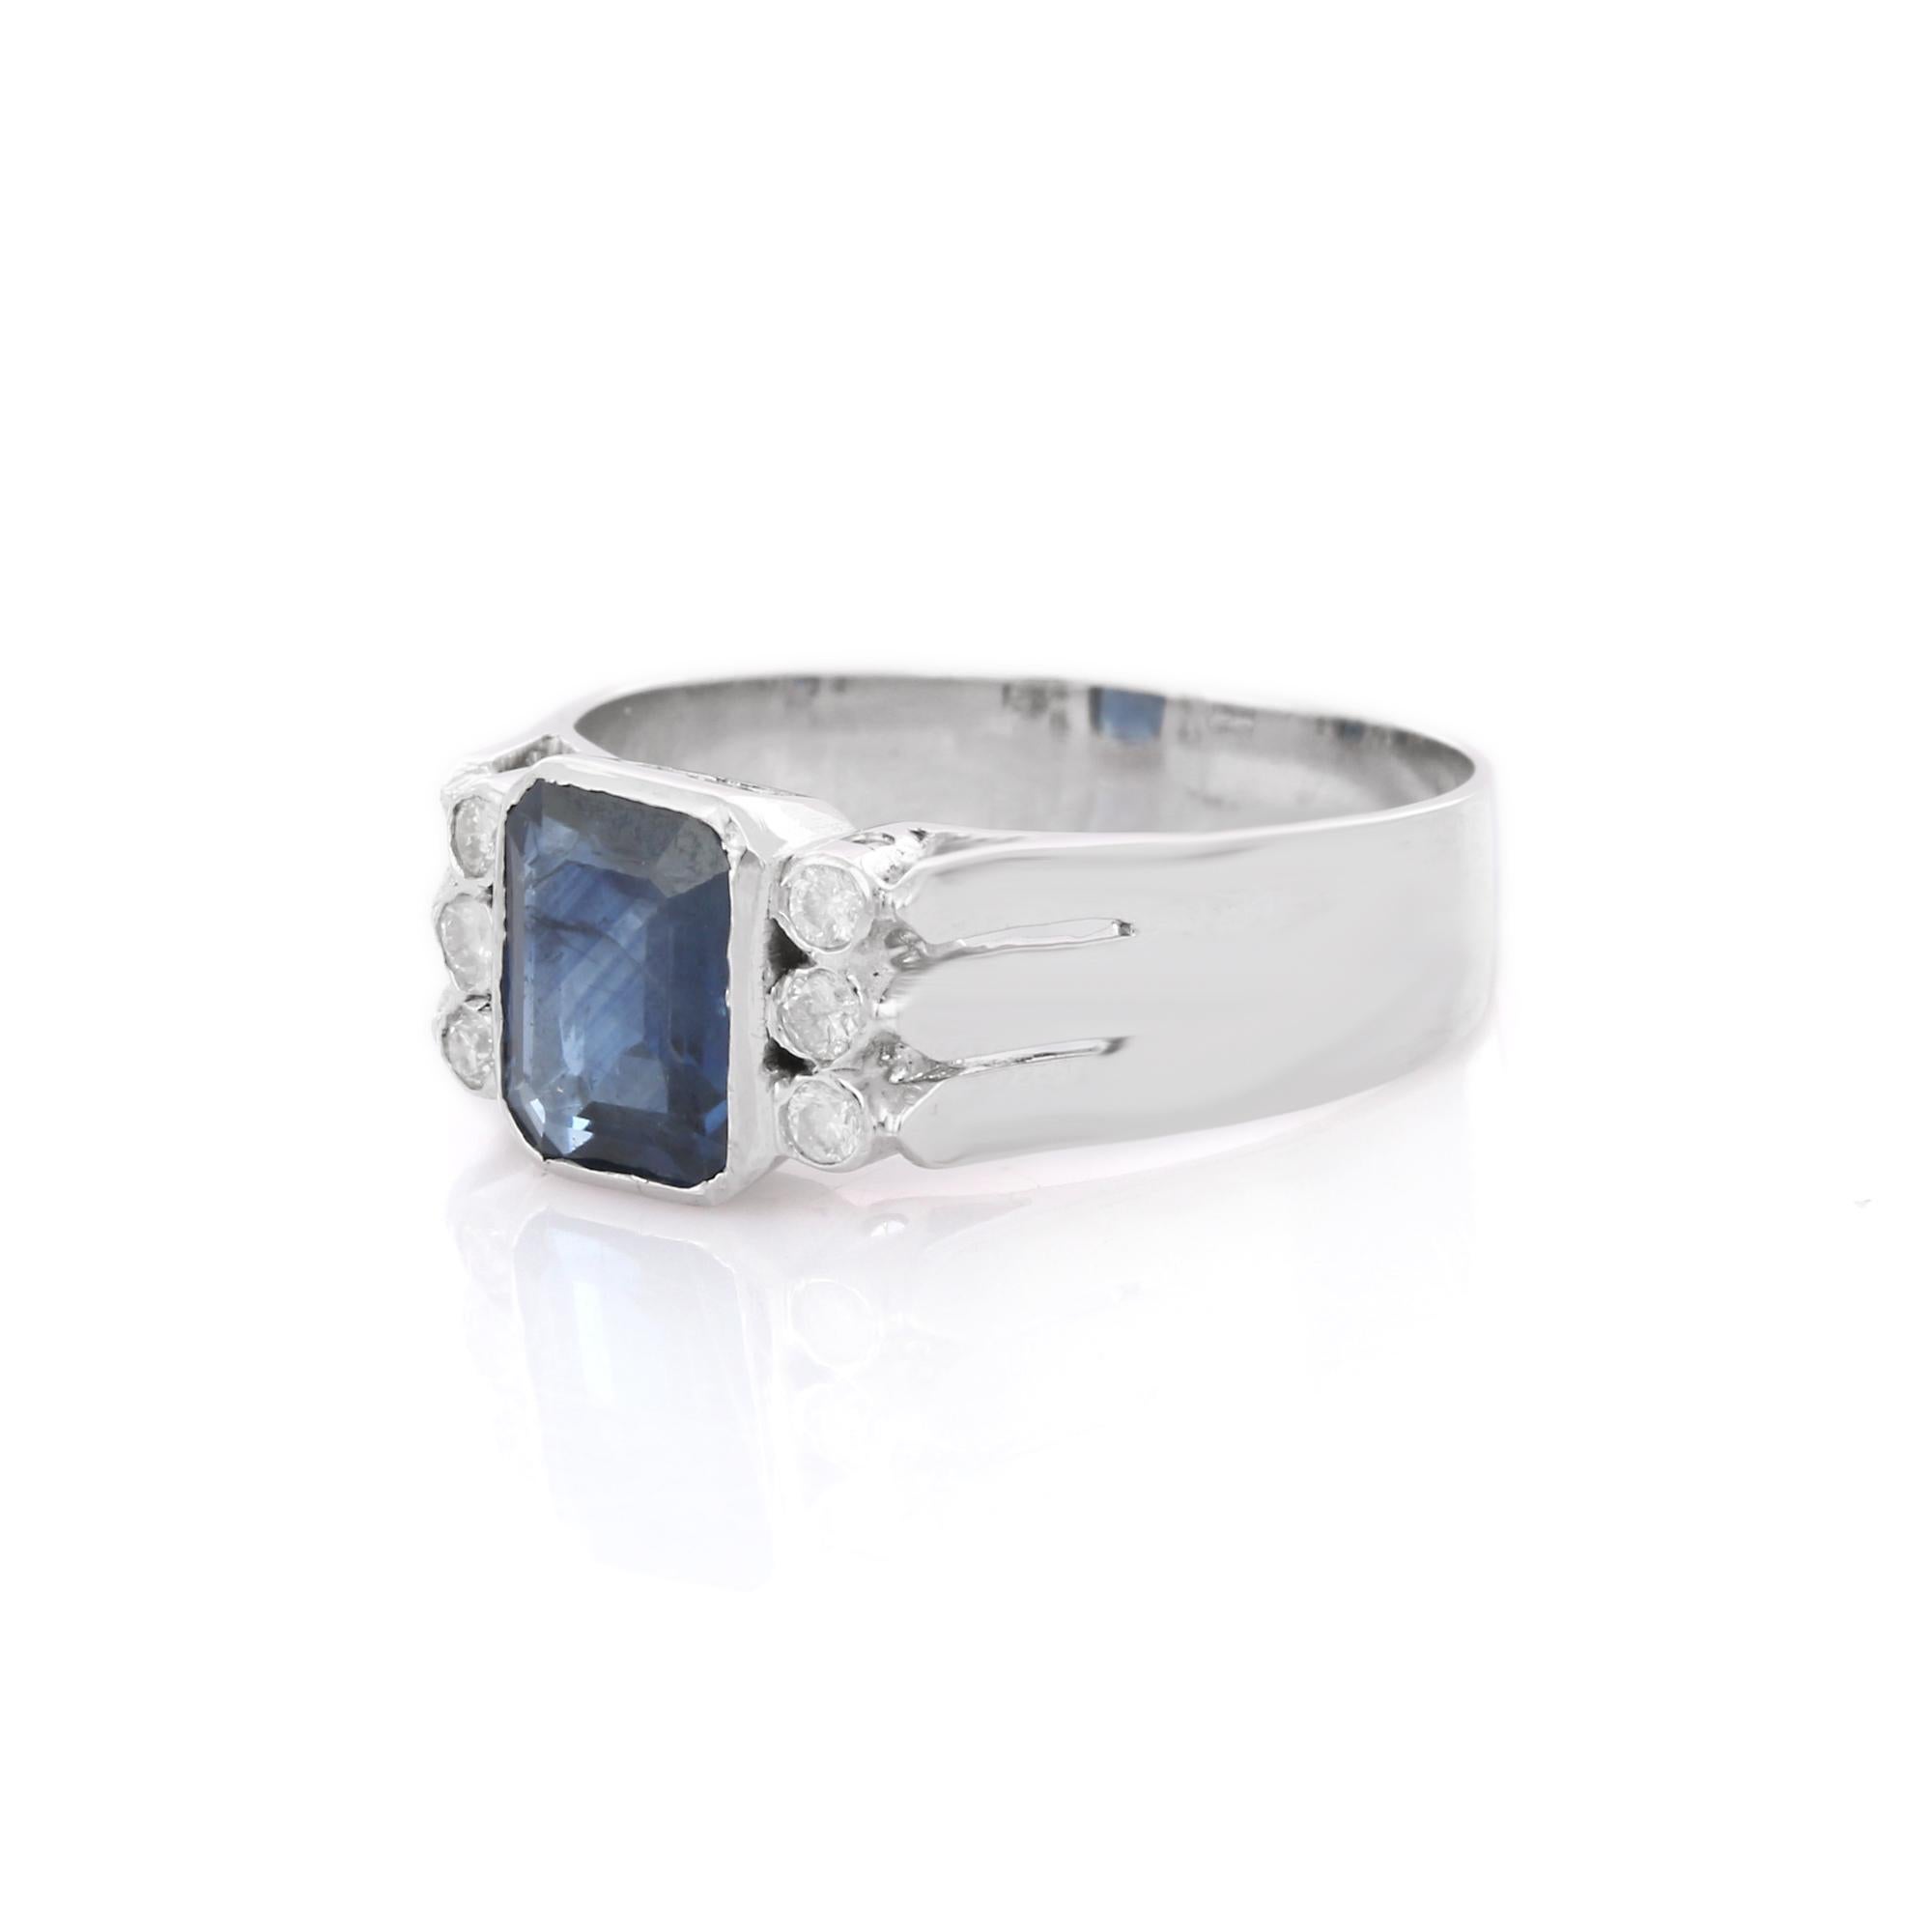 For Sale:  18K Solid White Gold Diamond Blue Sapphire Cocktail Ring 3